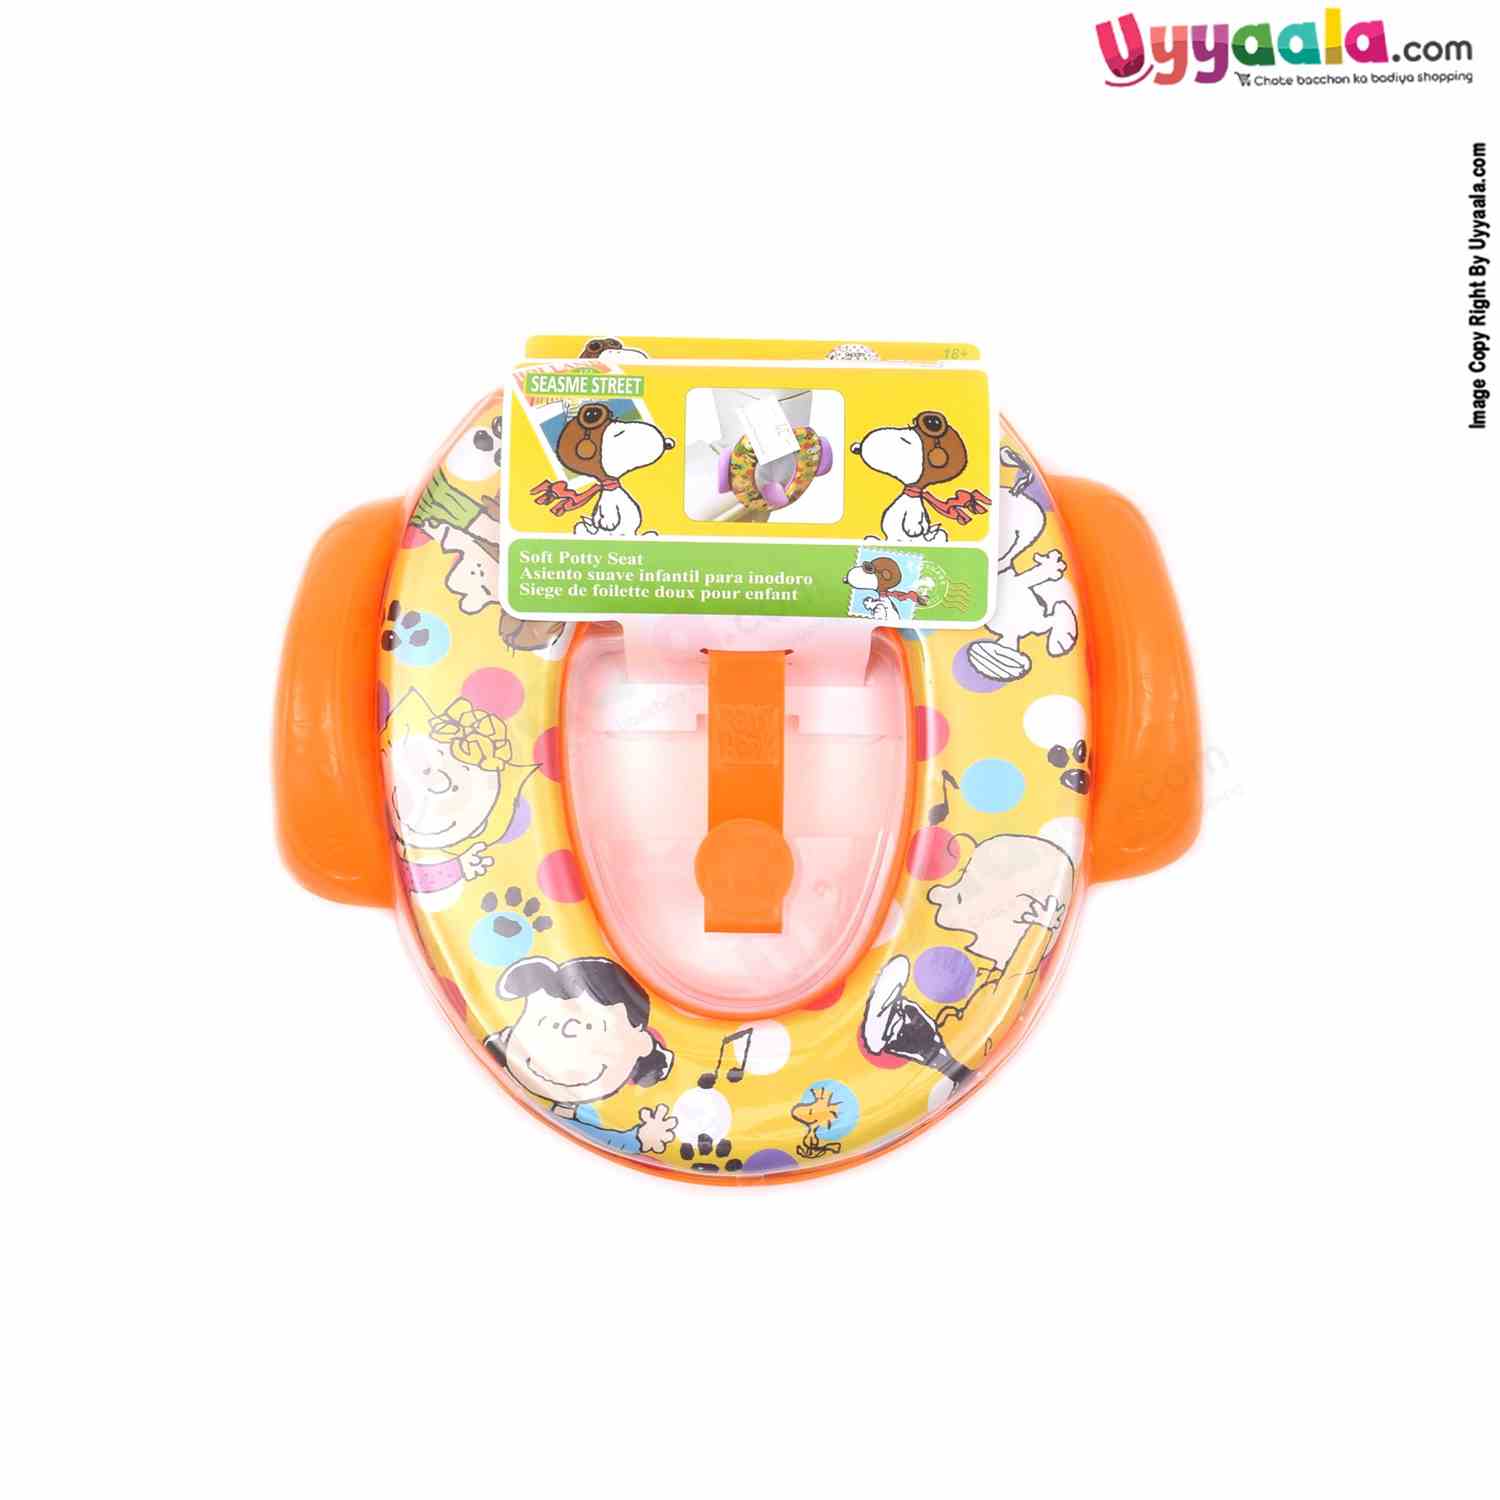 StarAndDaisy Potty Training Seat for Baby Toddler Toilet Seats with Handle  - Orange